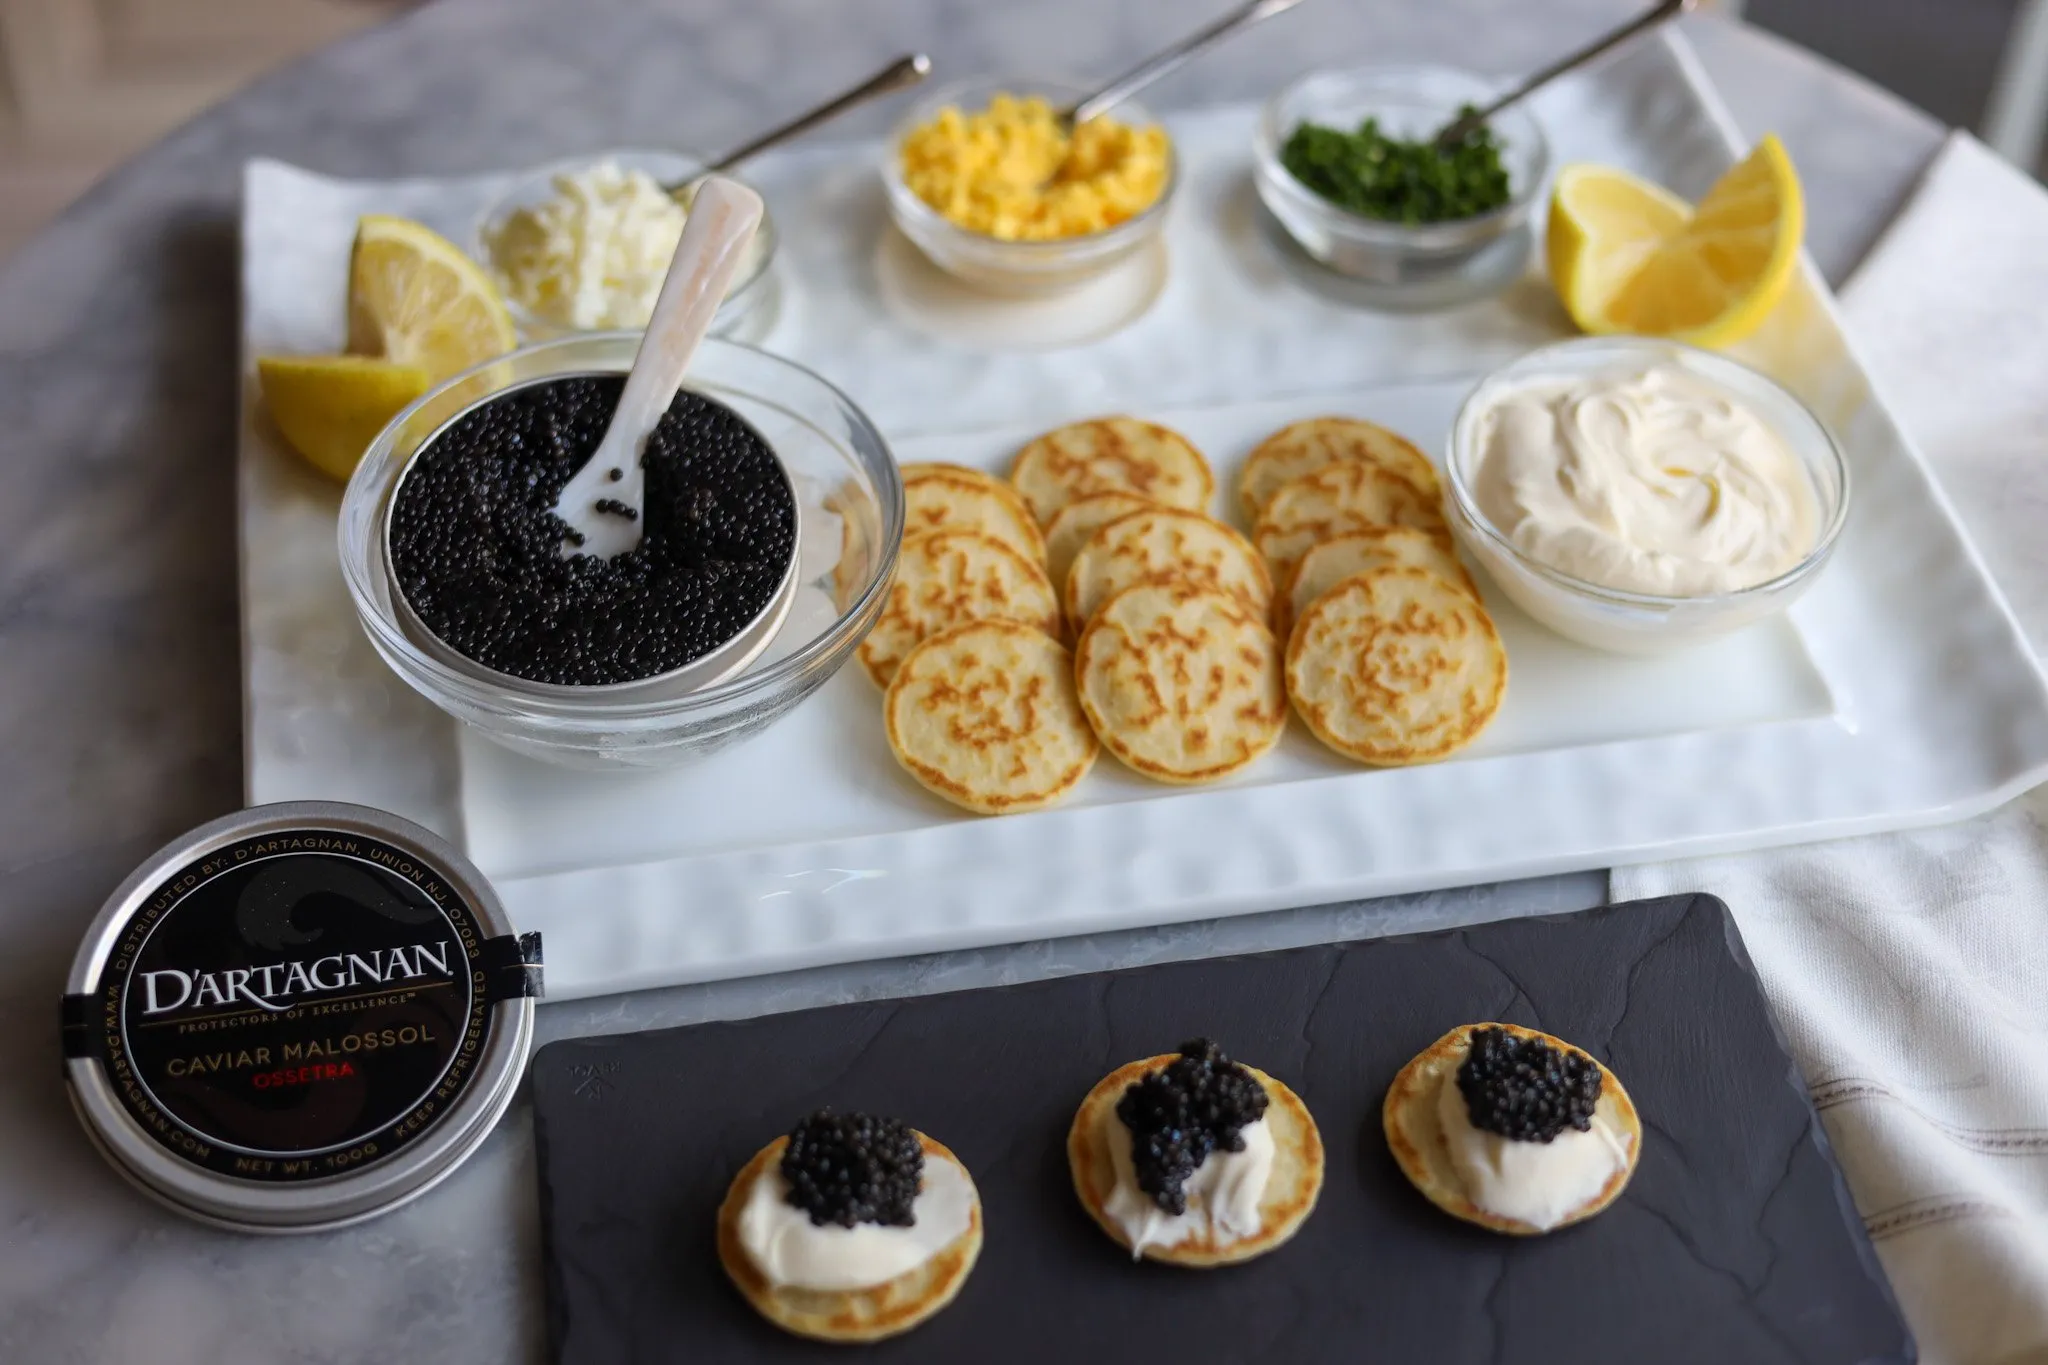 How to tell a good quality caviar